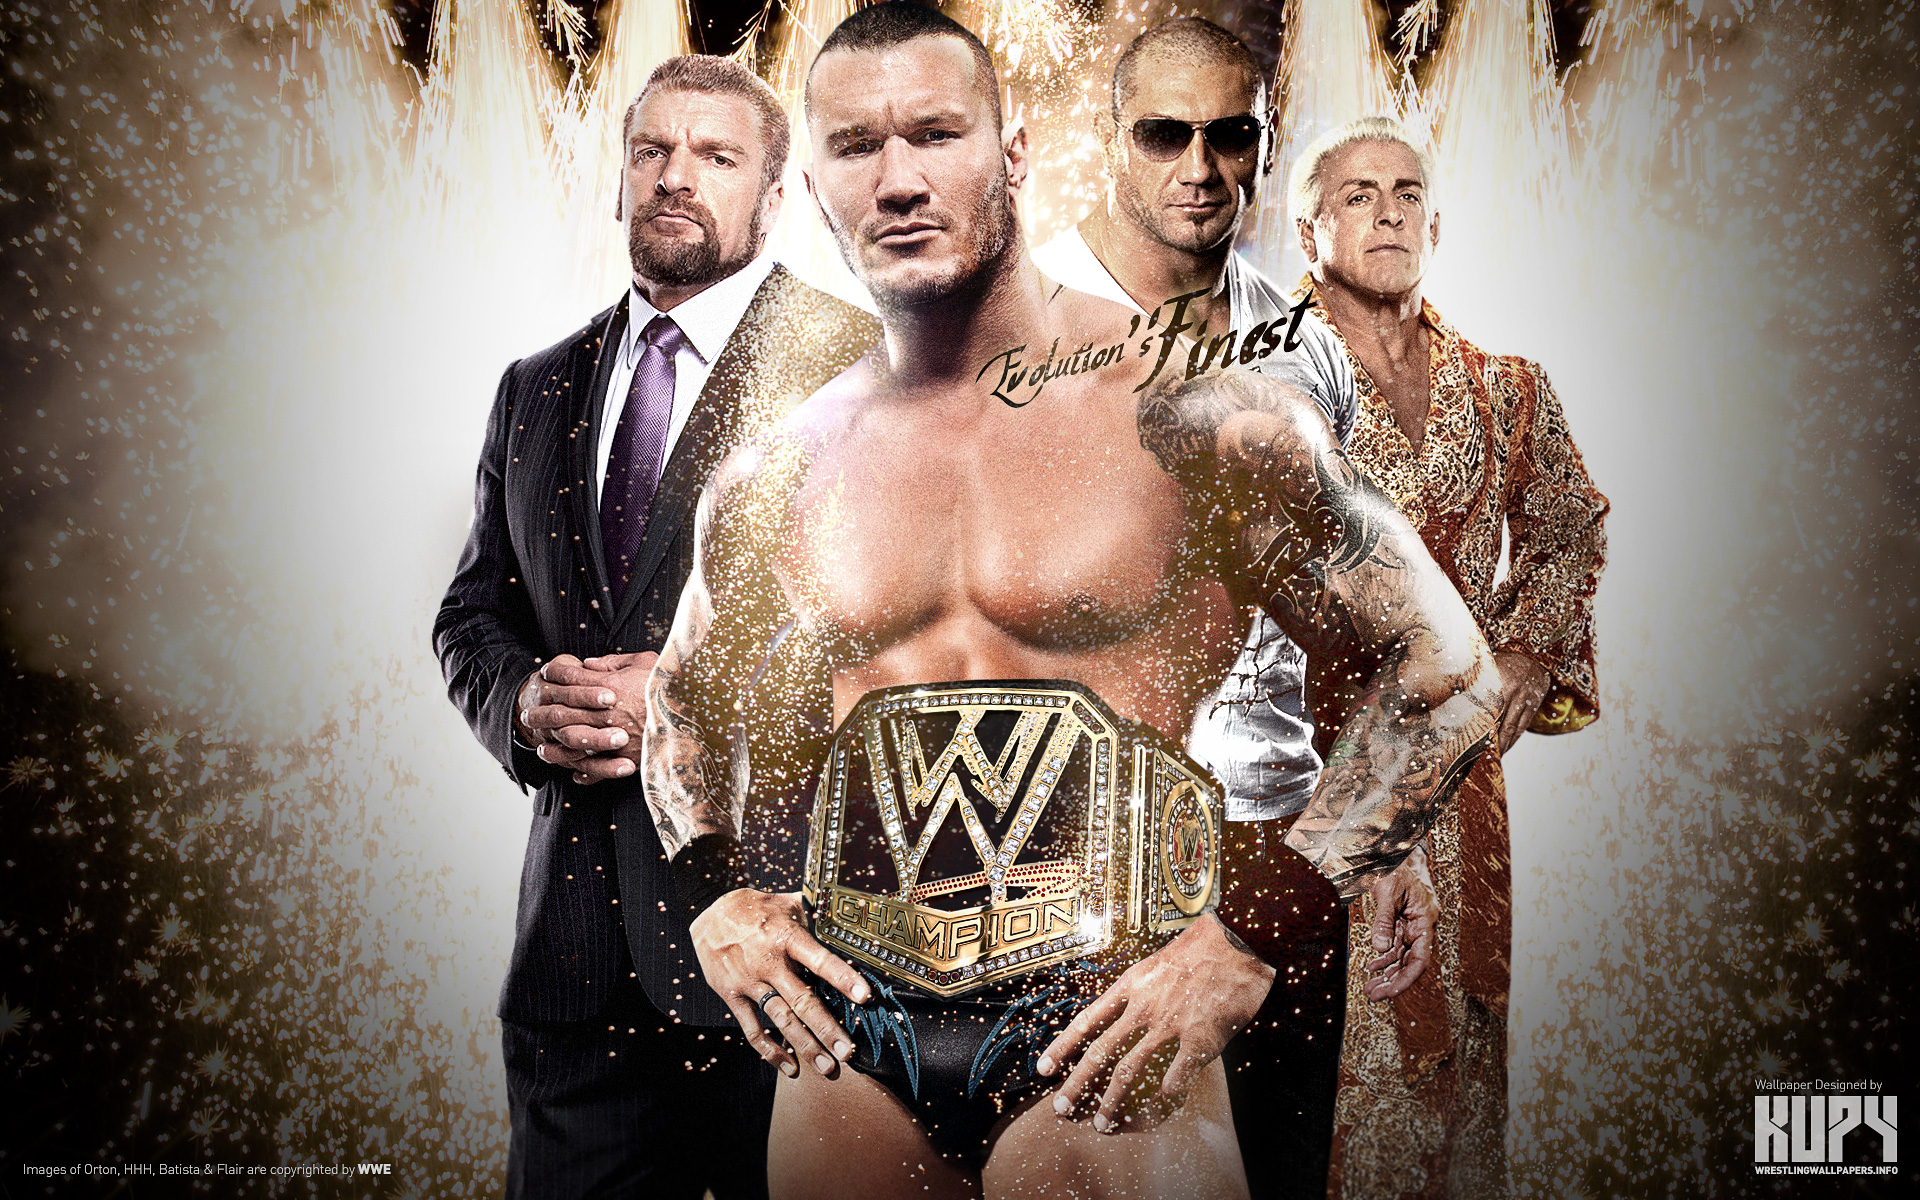  available Blog Archive NEW Randy Orton WWE Champion wallpaper